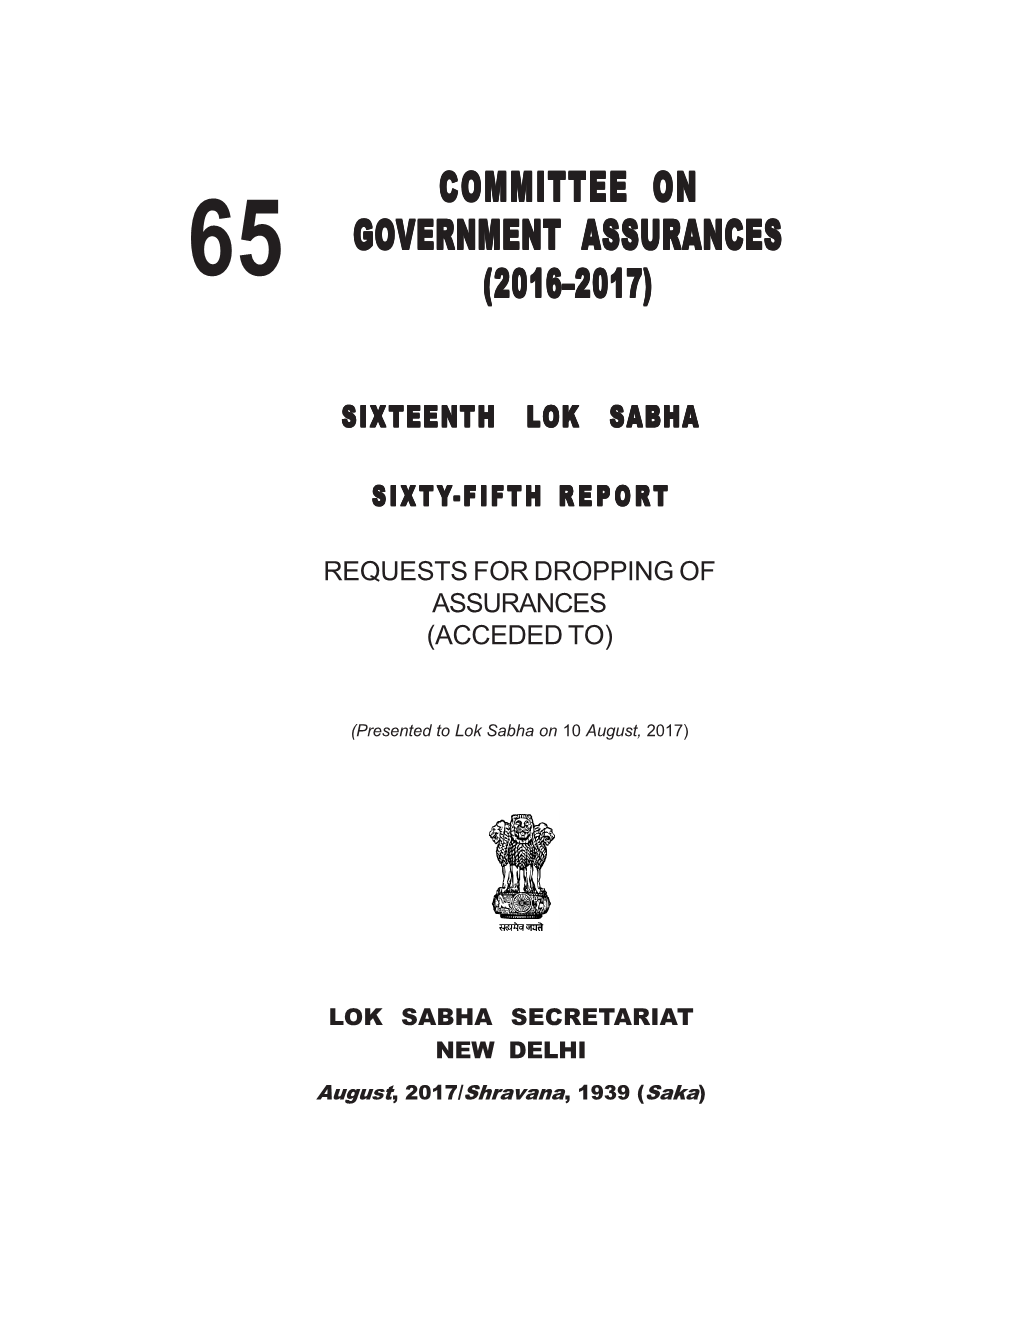 Committee on Government Assurances 65 (2016–2017)